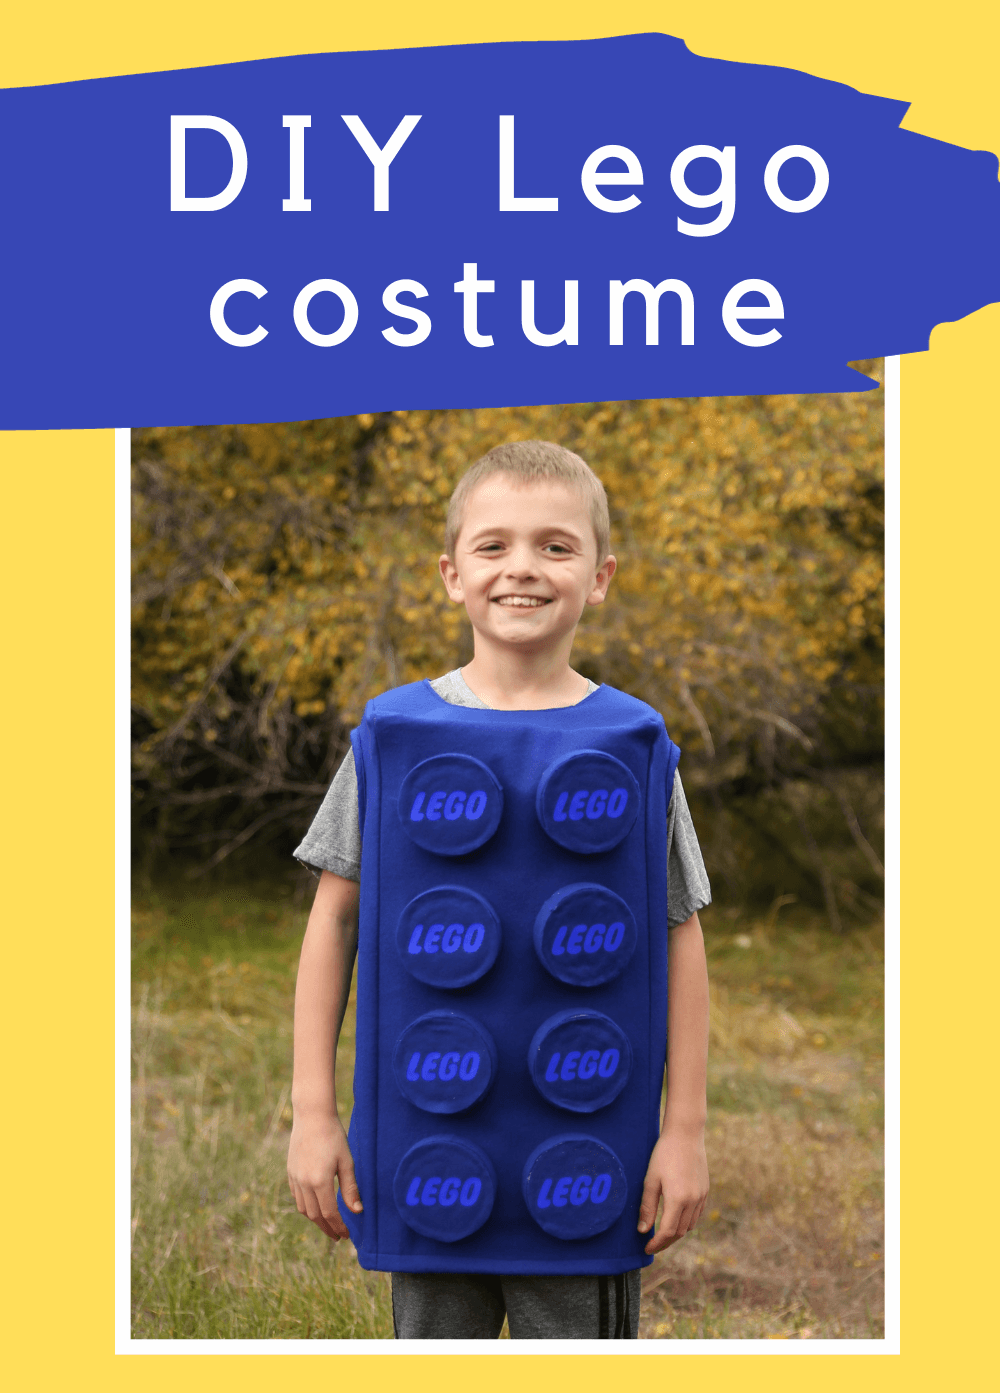 DIY Lego Costume: How to Sew a Lego Costume